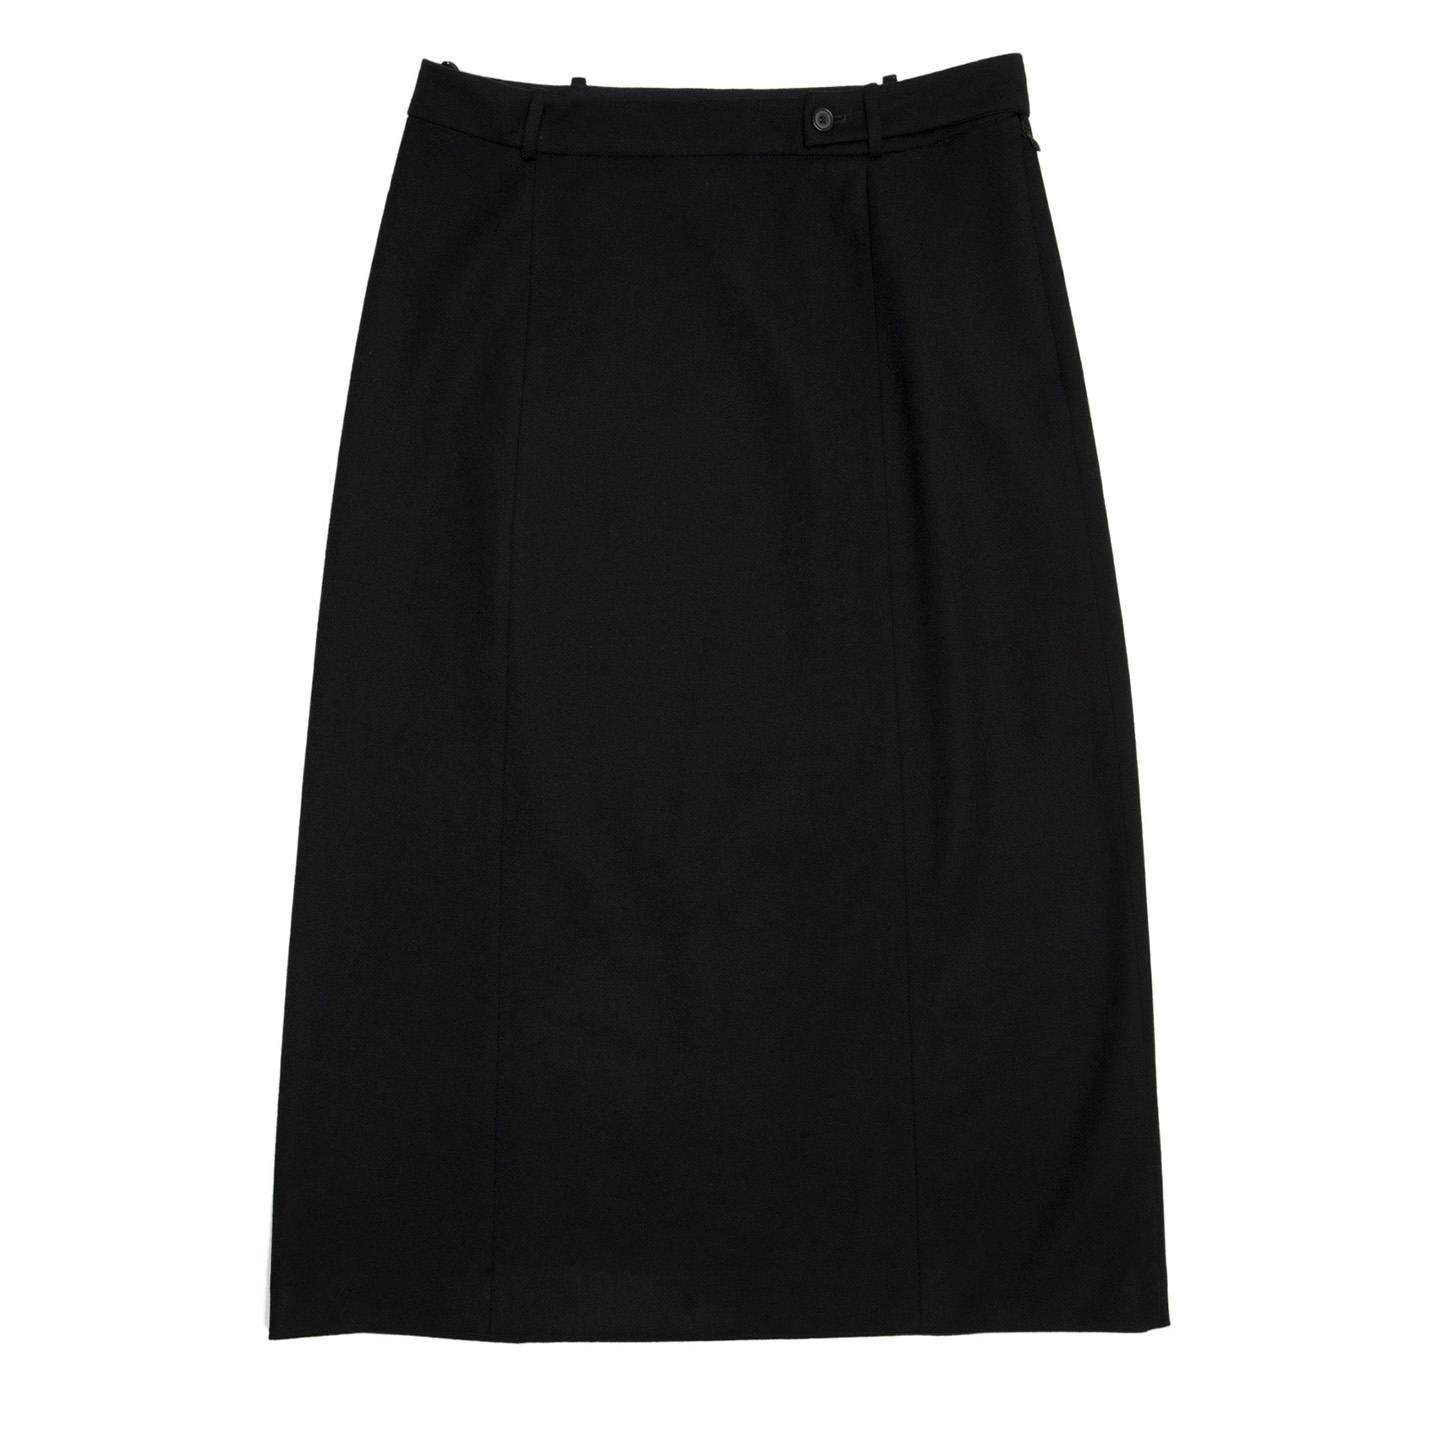 Prada Soft black wool straight knee length skirt divided in three panels at front and three panels at back. The waist band is longer on one side and it overlaps and fastens at front with a little button under one of the belt loops creating a nice